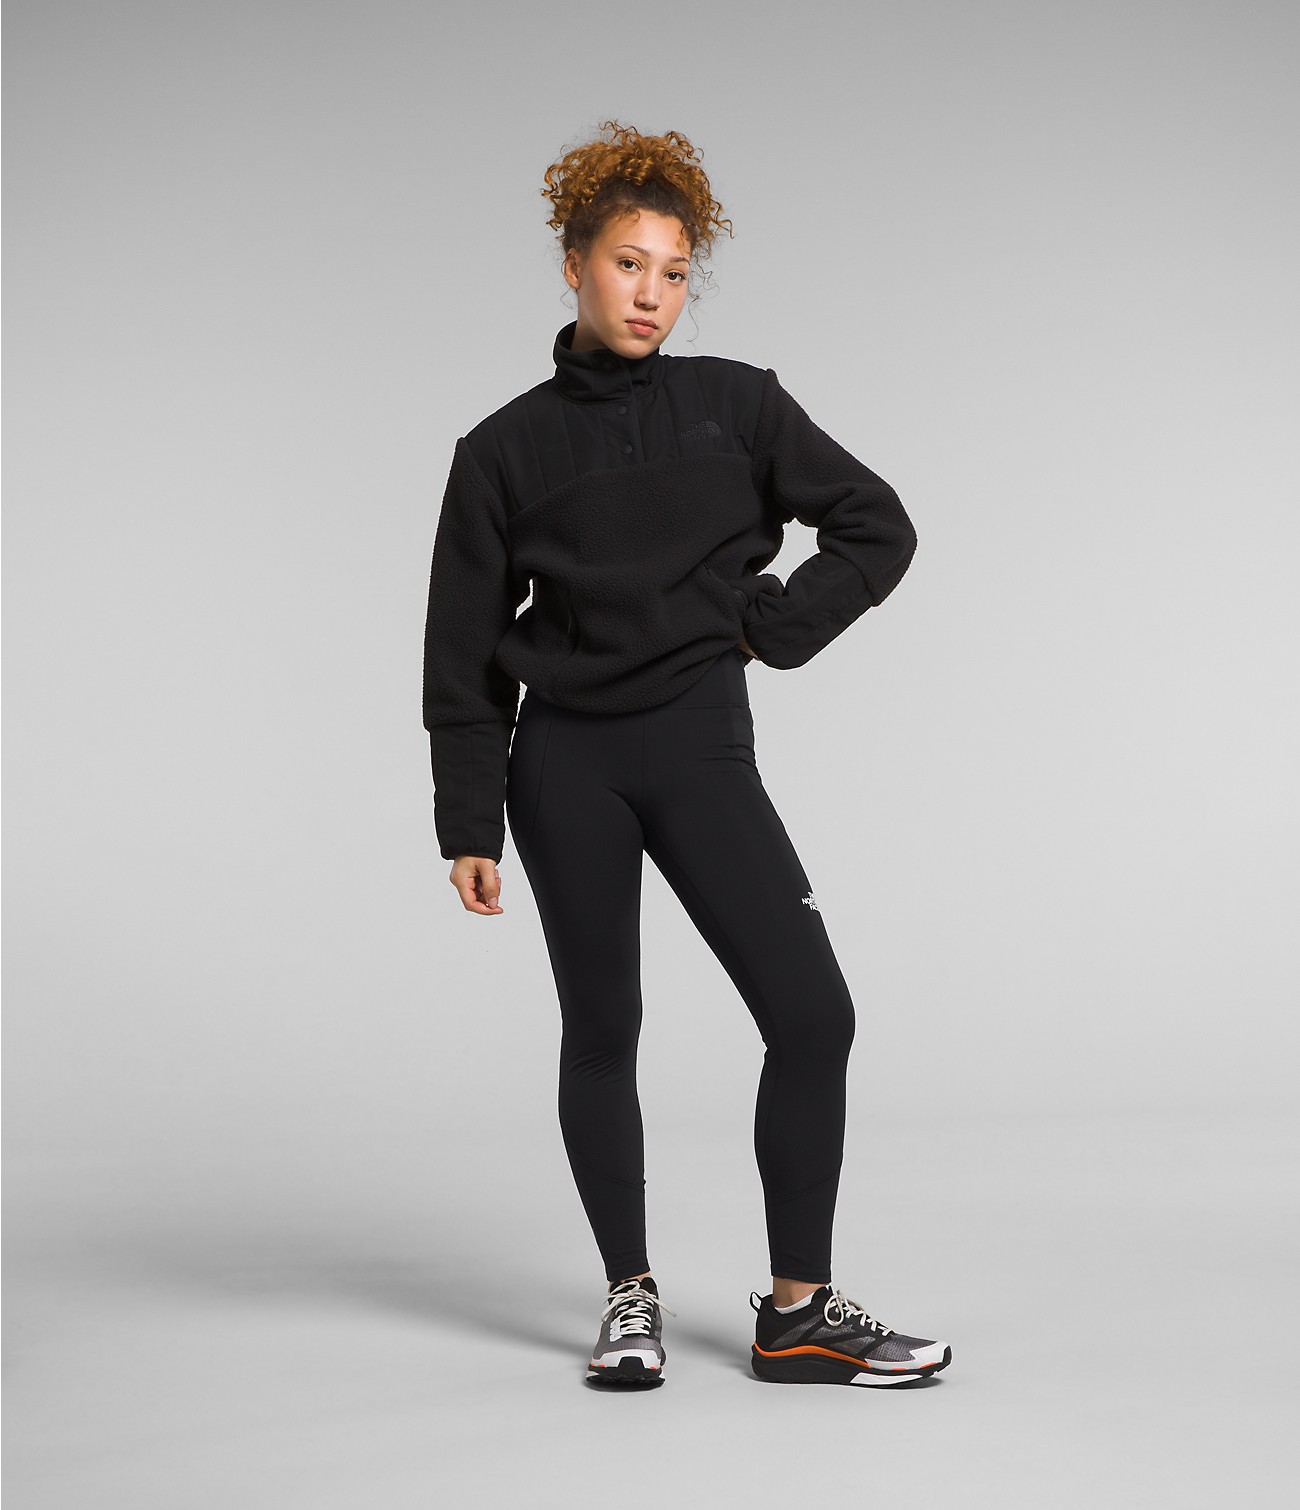 Women’s Winter Warm Pro Tights | The North Face